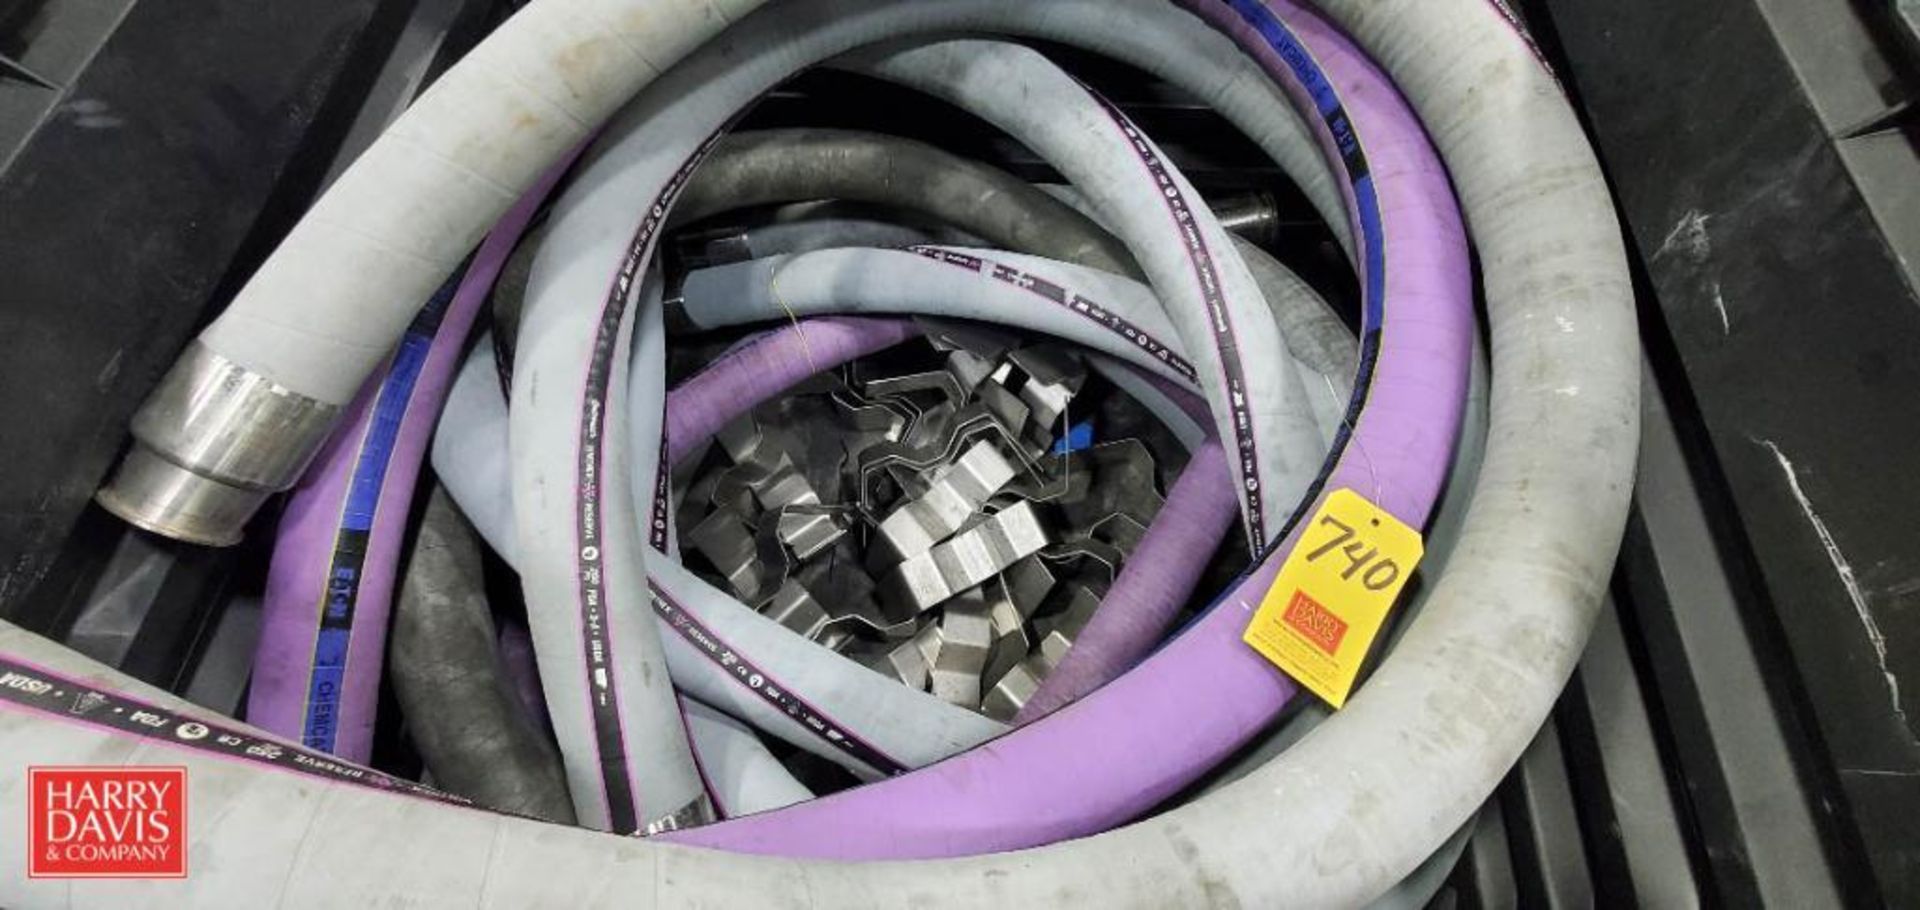 Discharge/Transfer Hoses, Assorted Sizes - Rigging Fee: $150